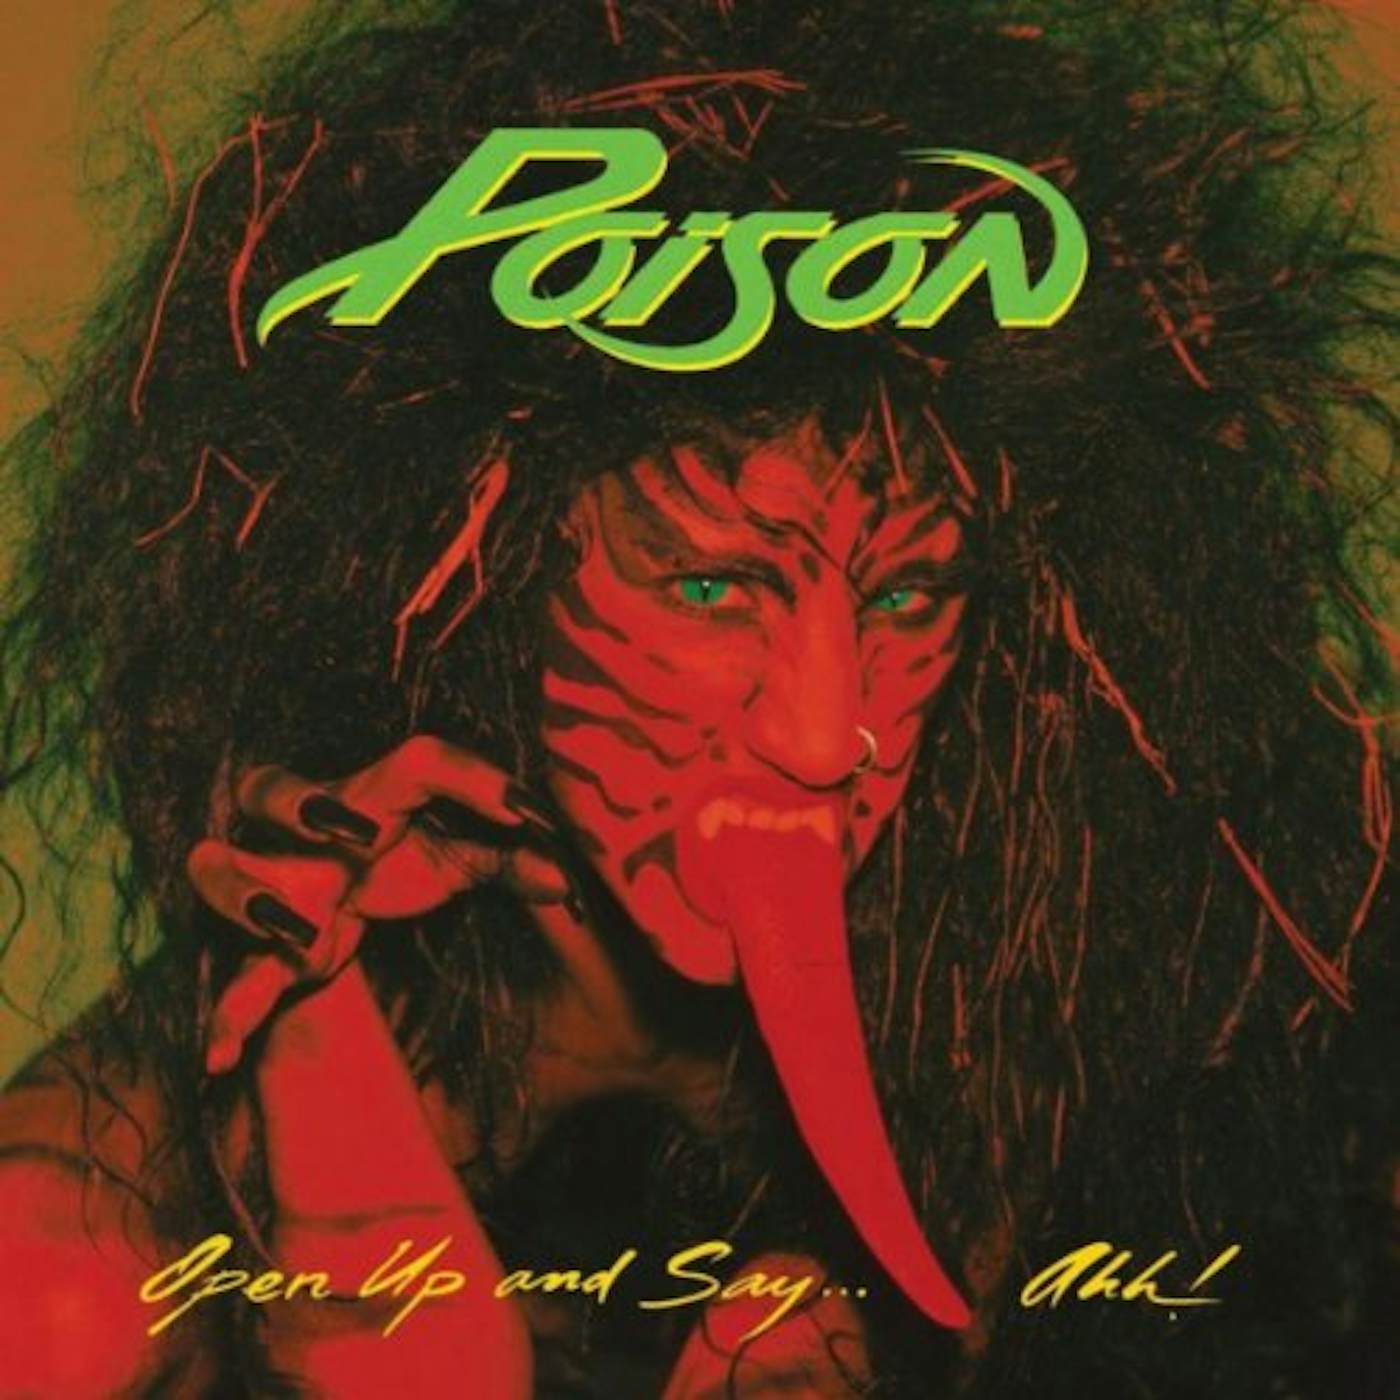 Poison OPEN UP AND SAY AHH Vinyl Record